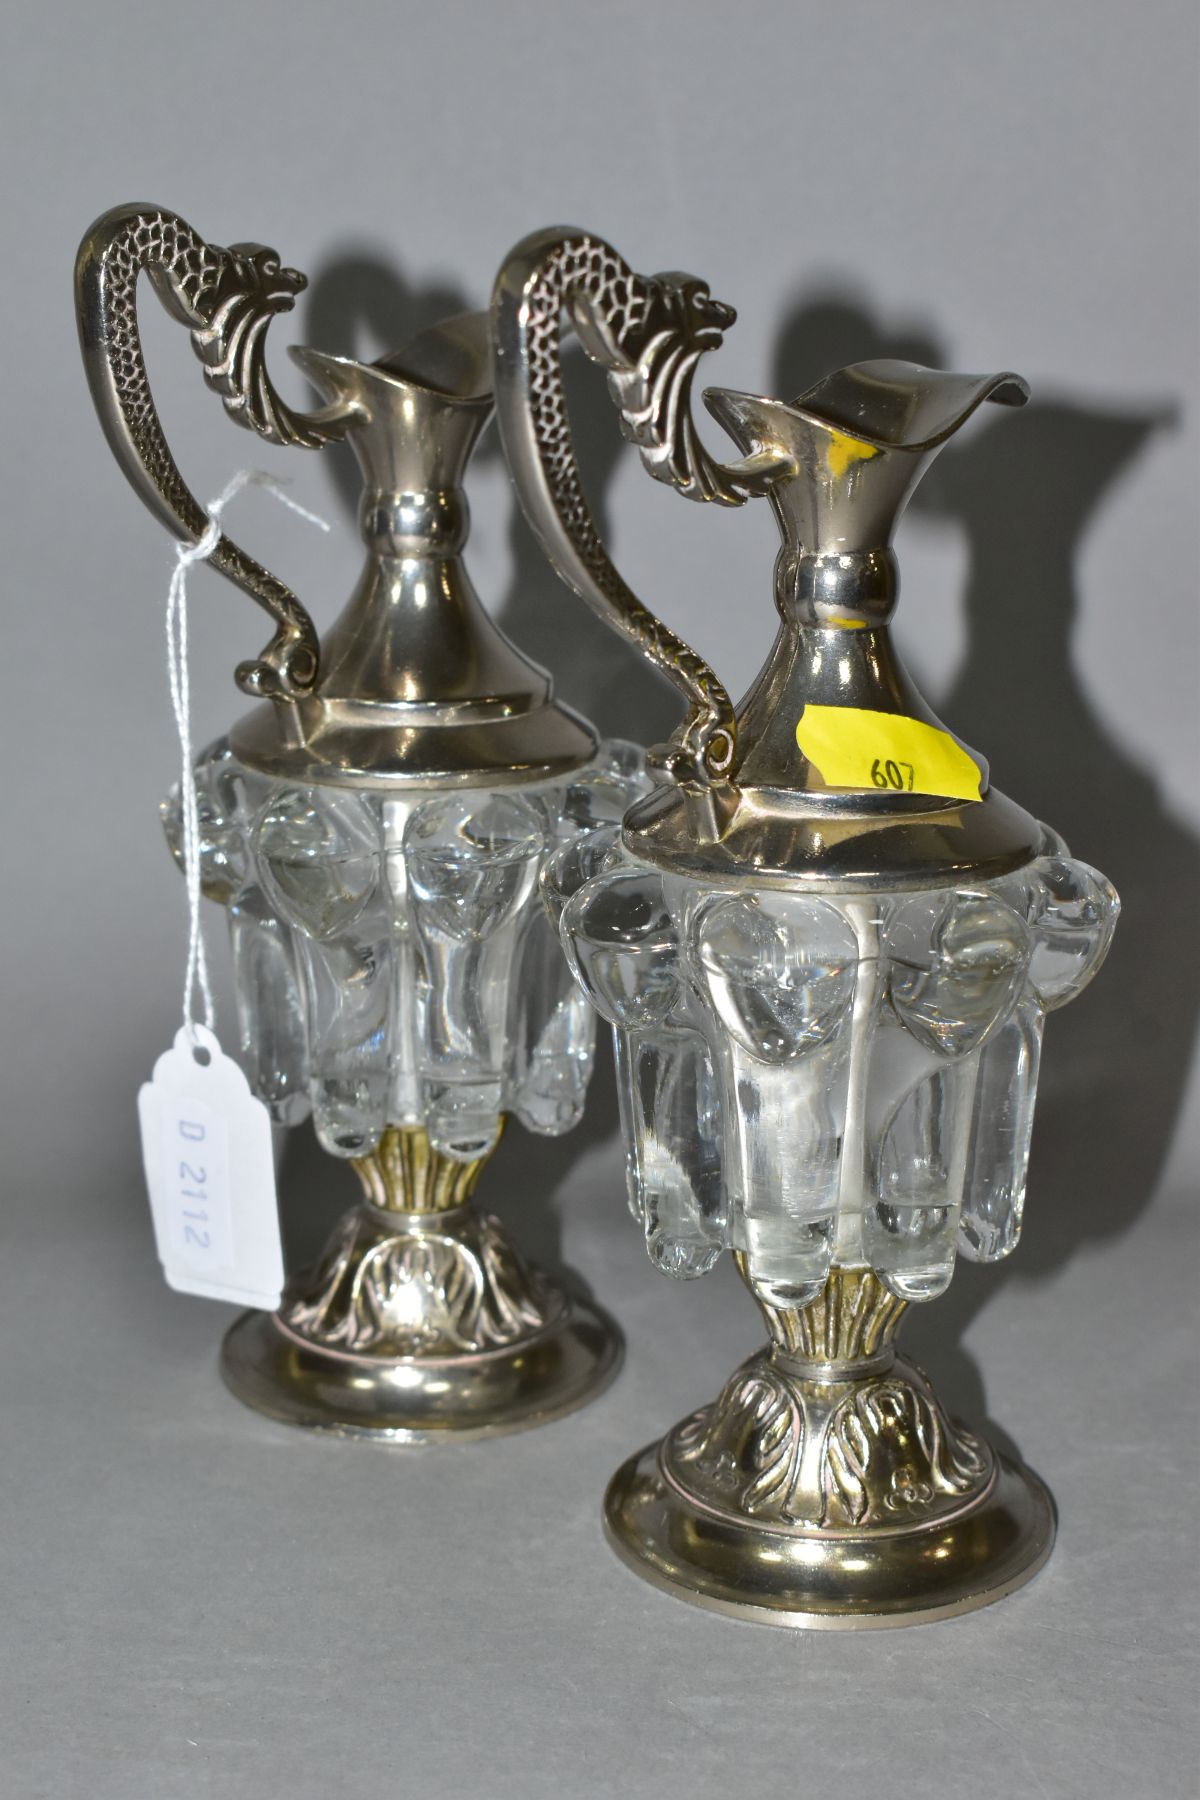 A PAIR OF DECORATIVE GLASS AND EPNS MINIATURE CLARET JUGS, the handles cast as mythical creatures, - Image 4 of 7